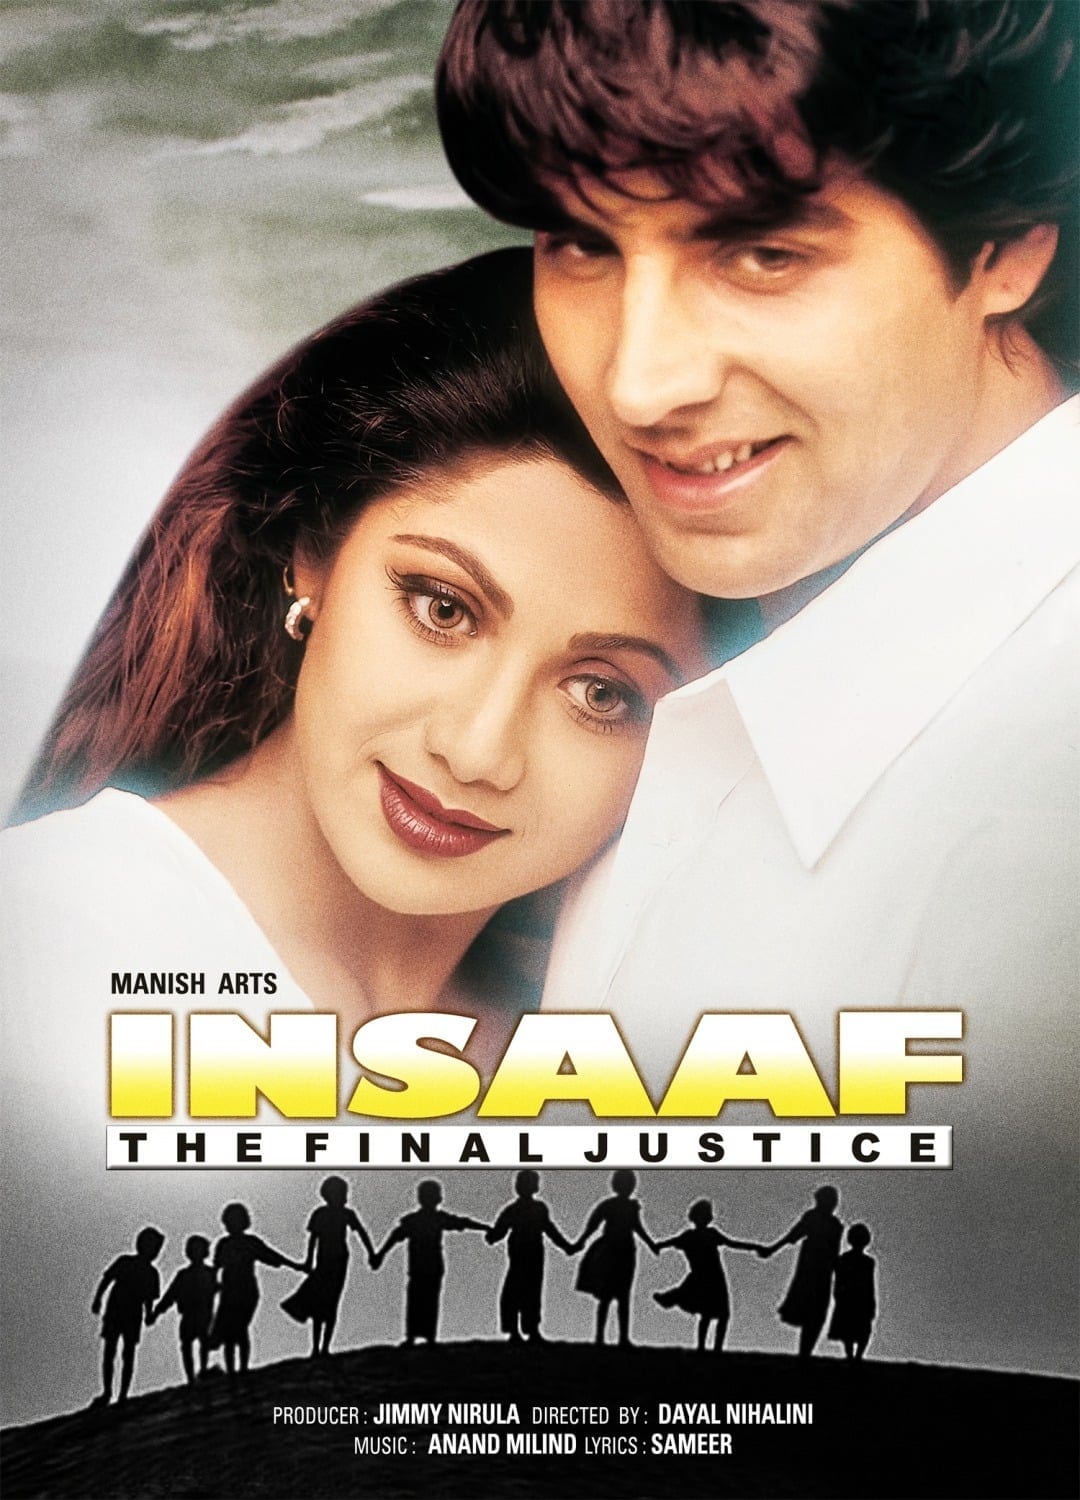 Poster for the movie "Insaaf: The Final Justice"